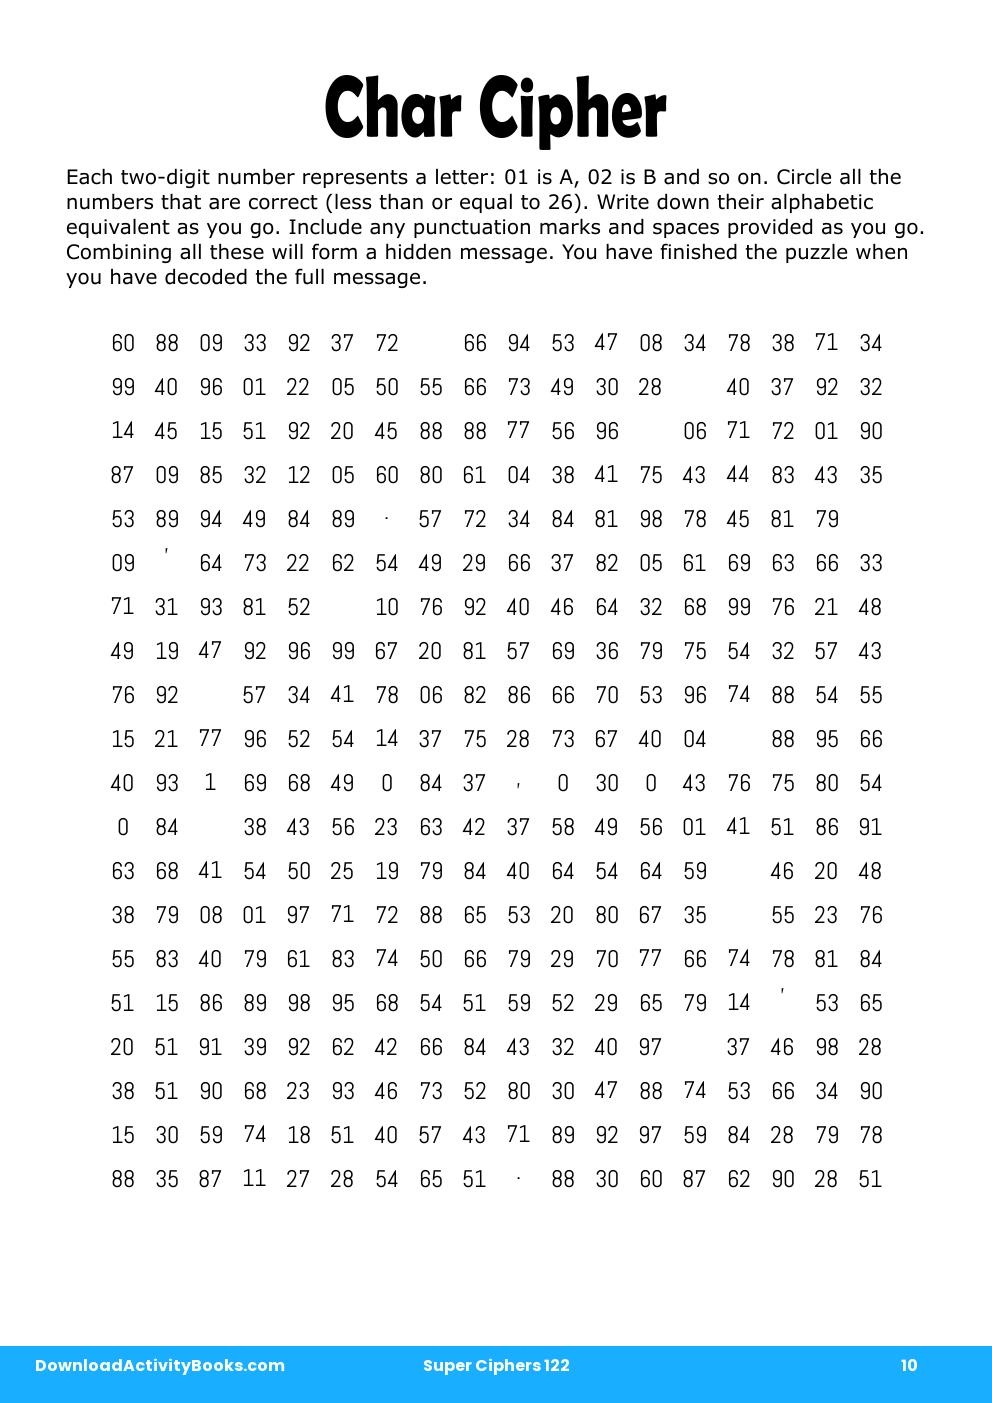 Char Cipher in Super Ciphers 122